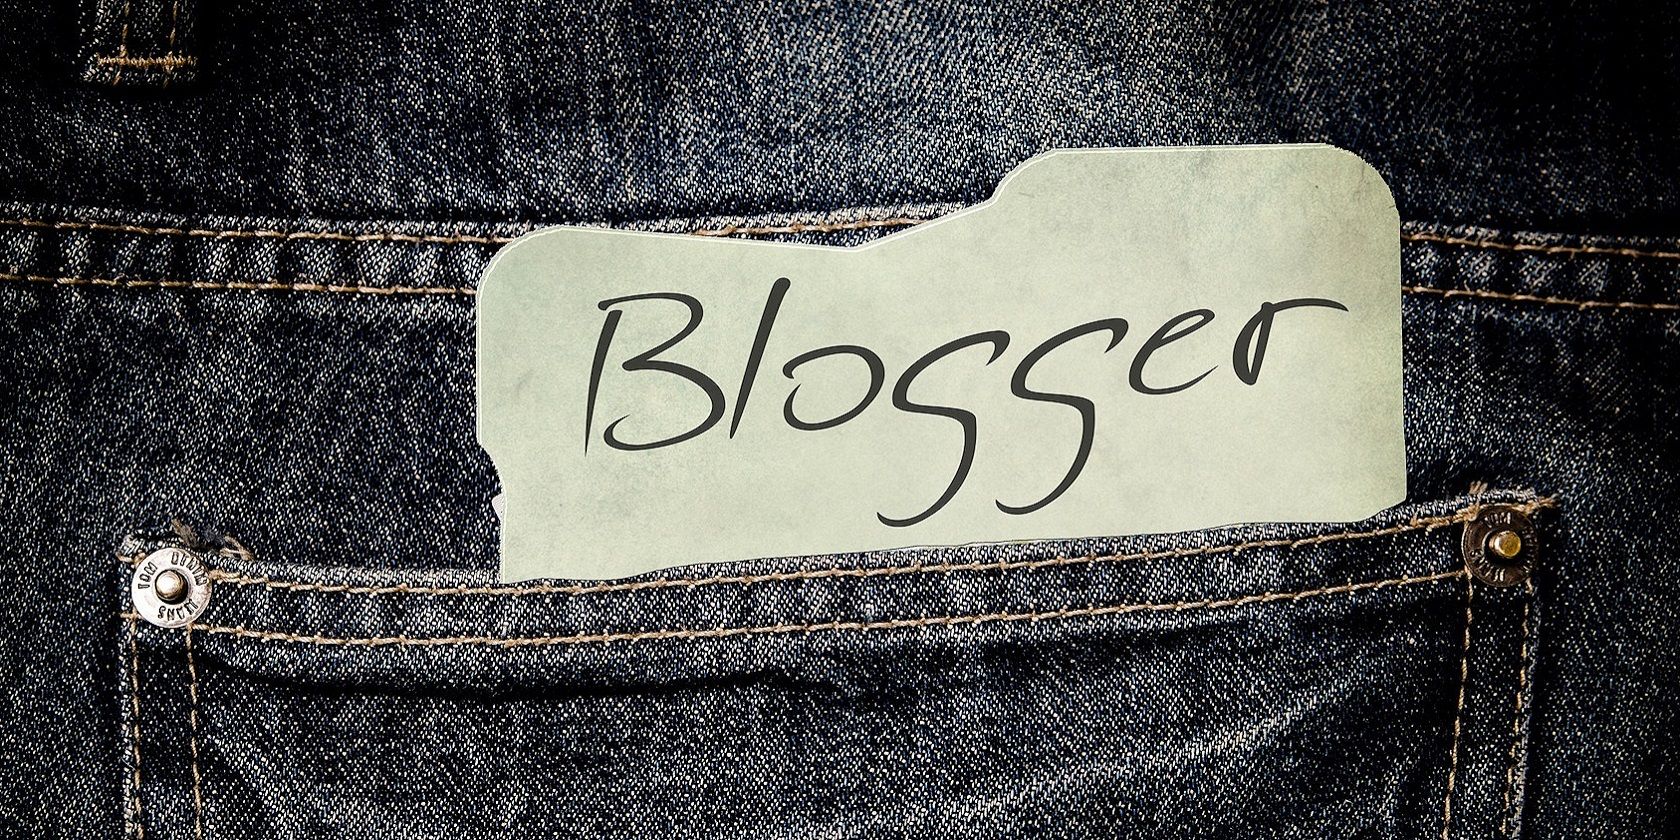 A Blogger note in a pocket 